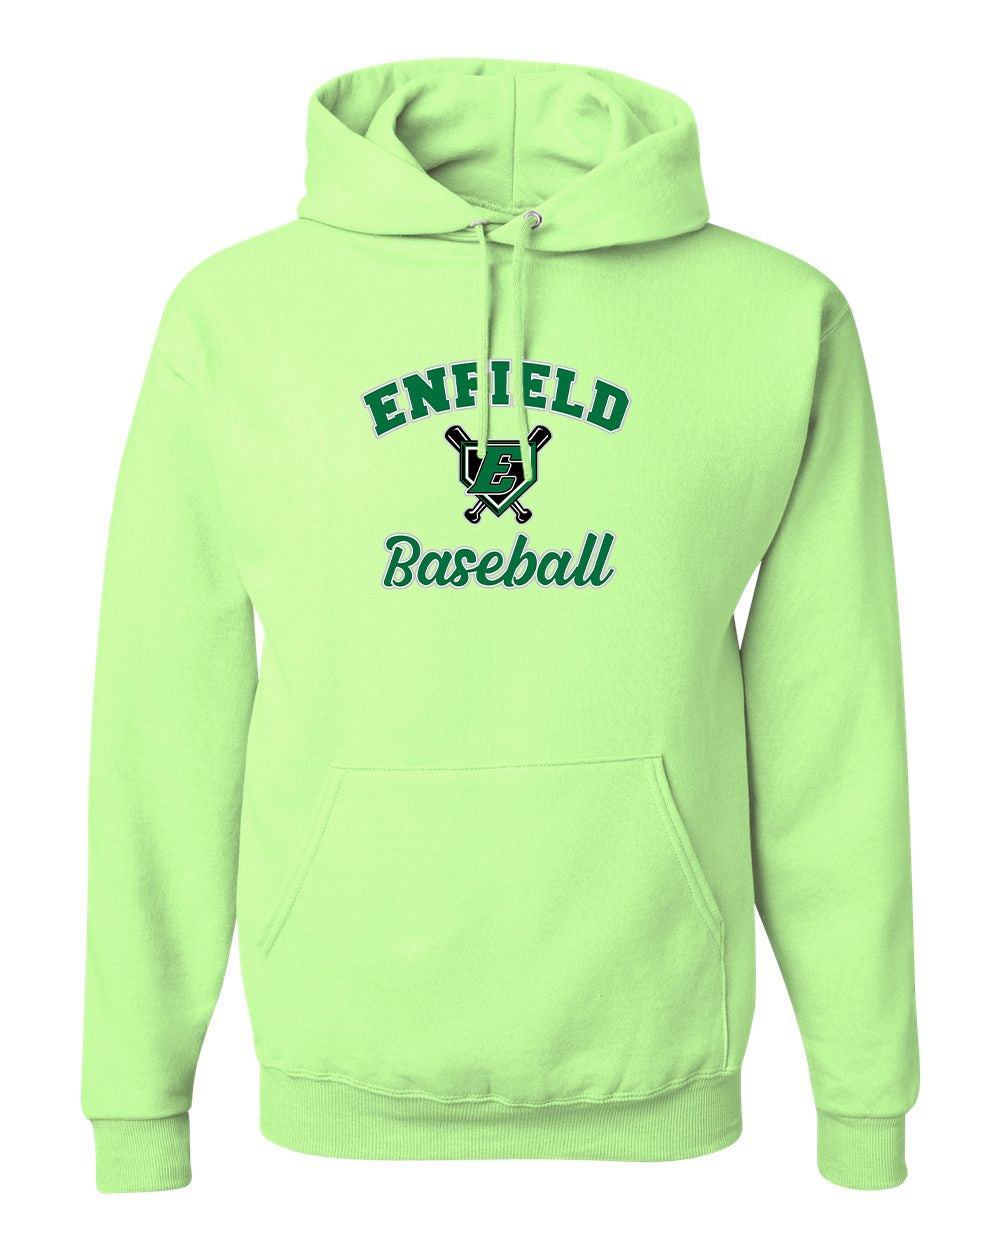 ELL Adult Hoodie "CC Baseball" - 996M (color options available)